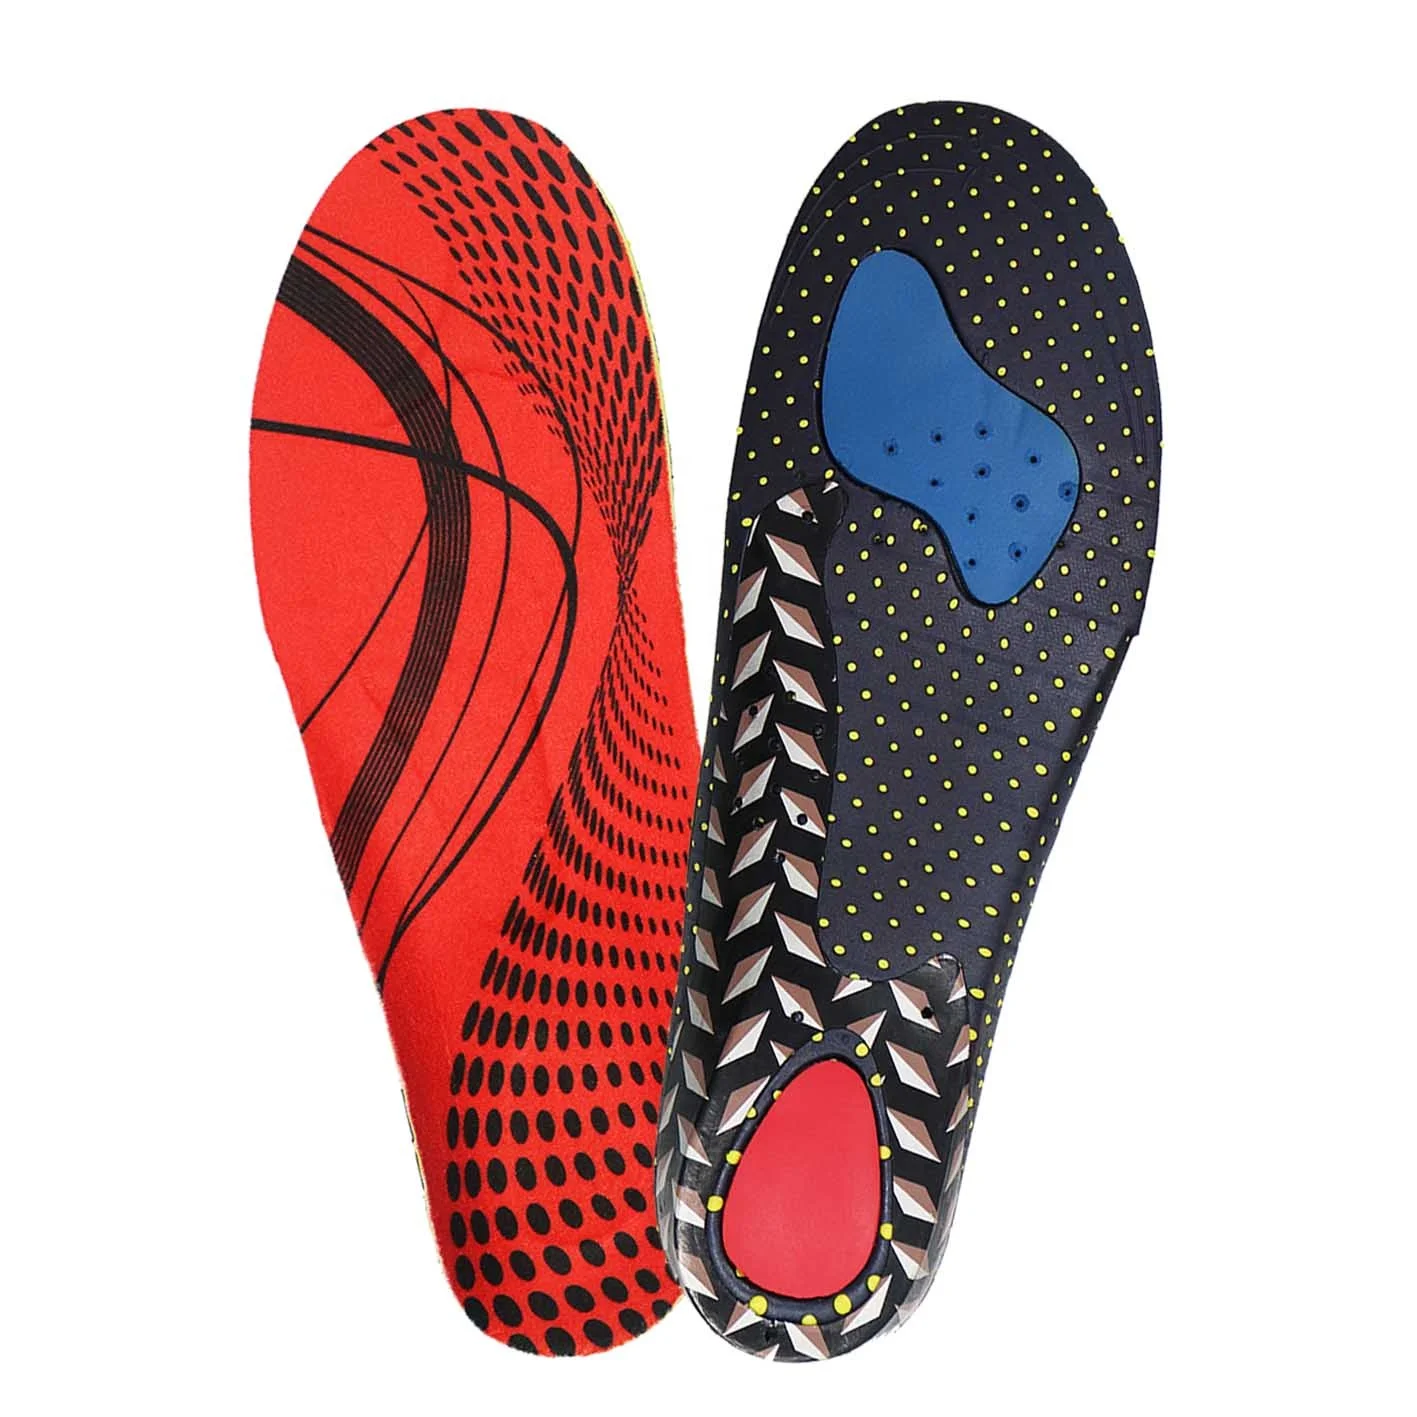 Eva Sport Arch Support Orthotic Insoles - Buy Orthotic Insoles,Arch ...